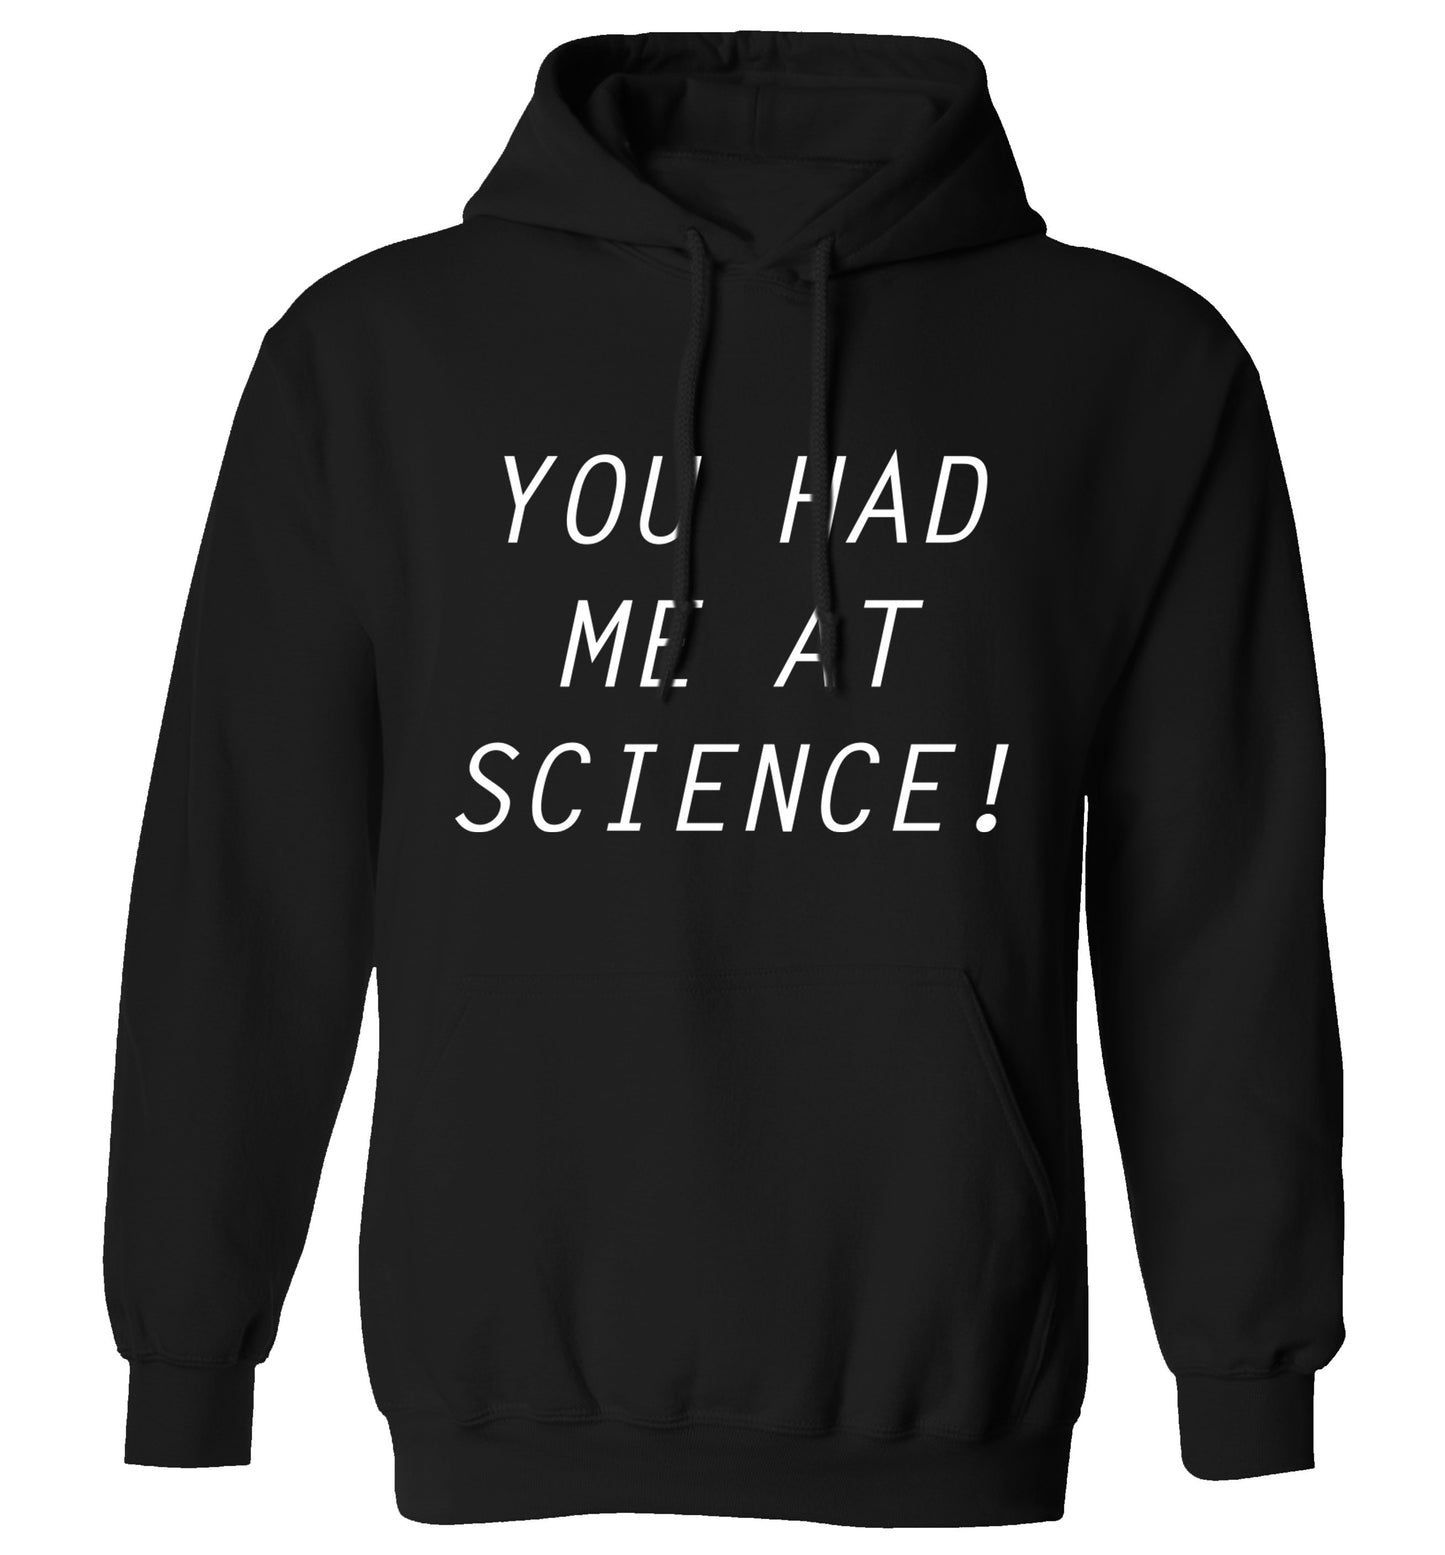 You had me at science adults unisex black hoodie 2XL